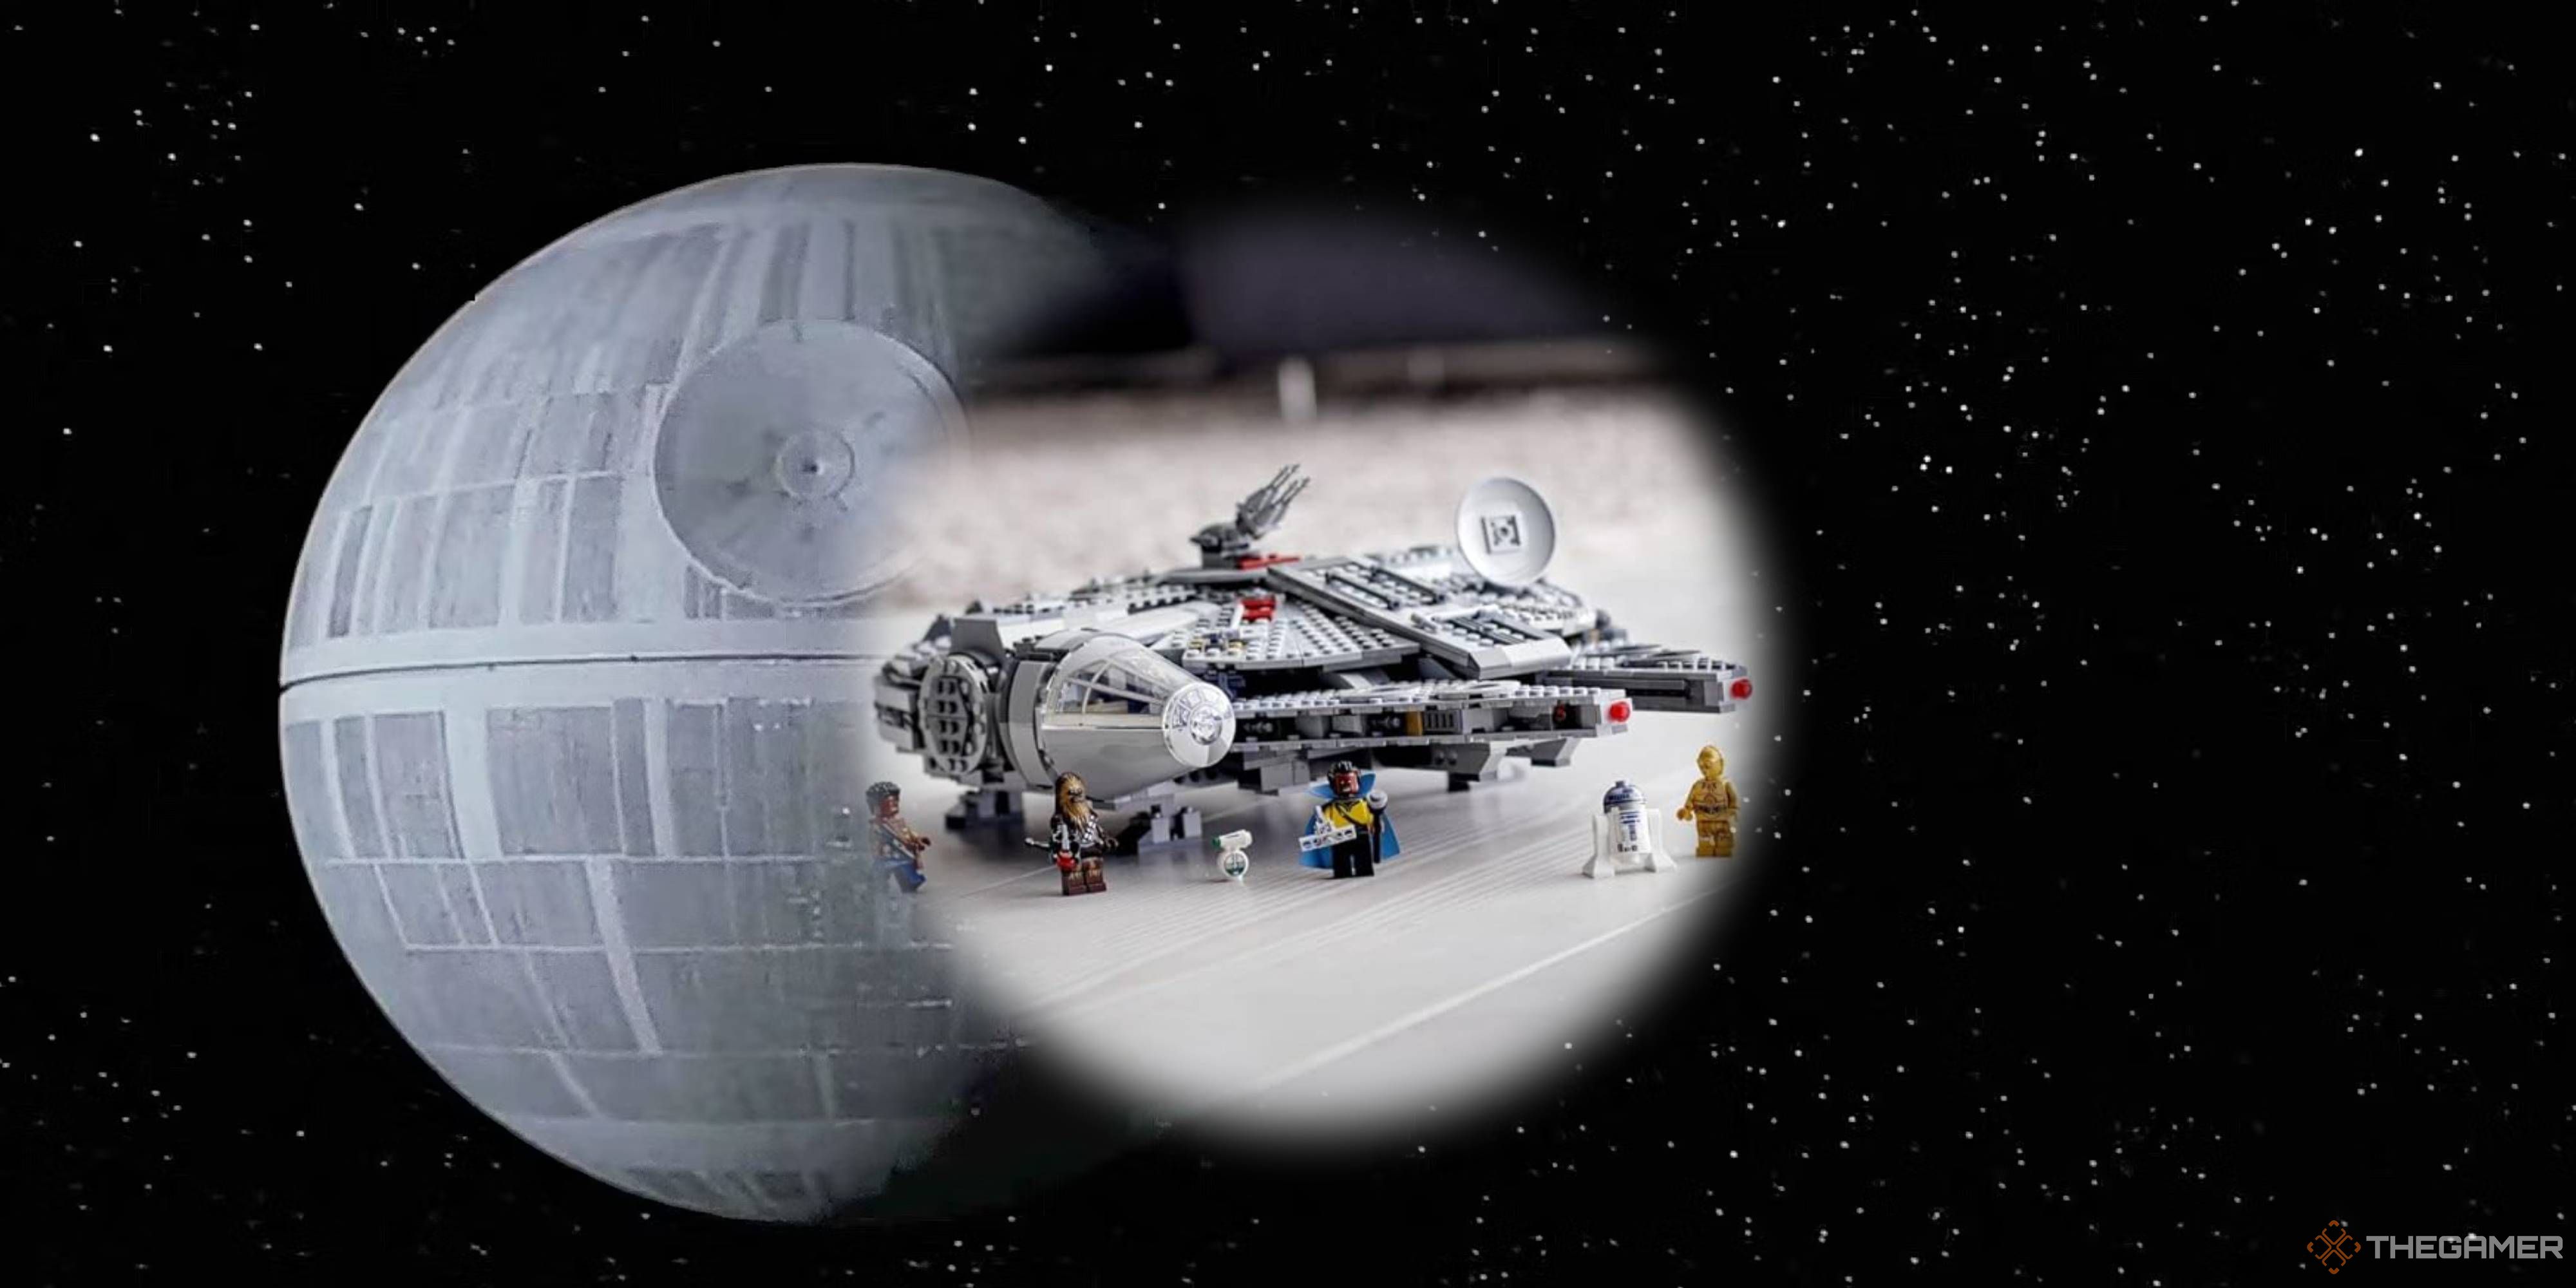 lego millennium falcon with minifigures and the death star in the background